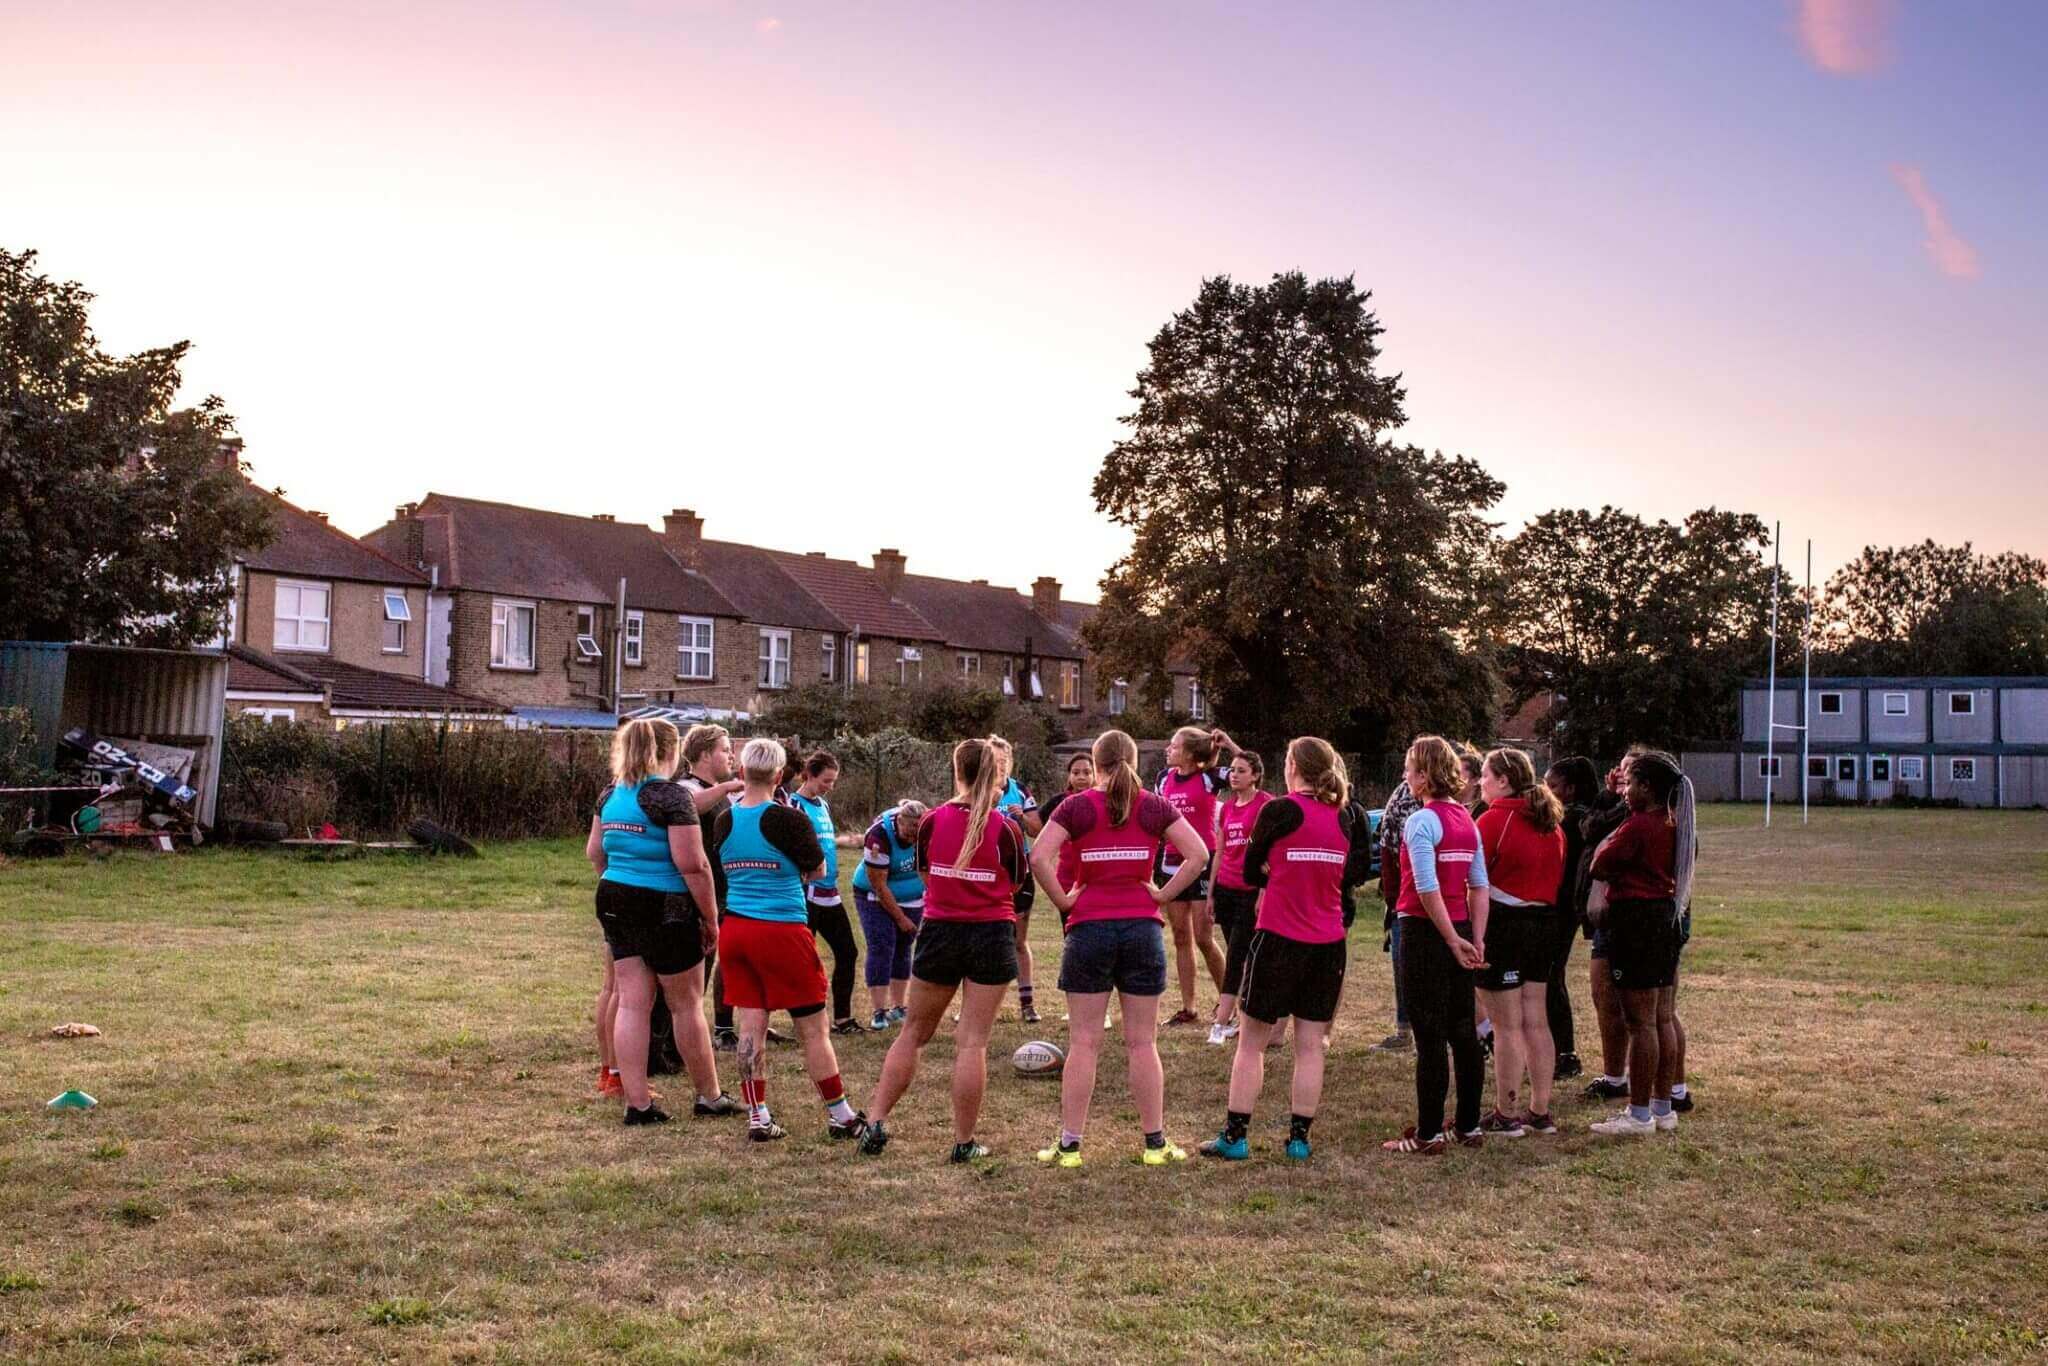 Play Women's Rugby In London for FREE with RFU Inner Warrior